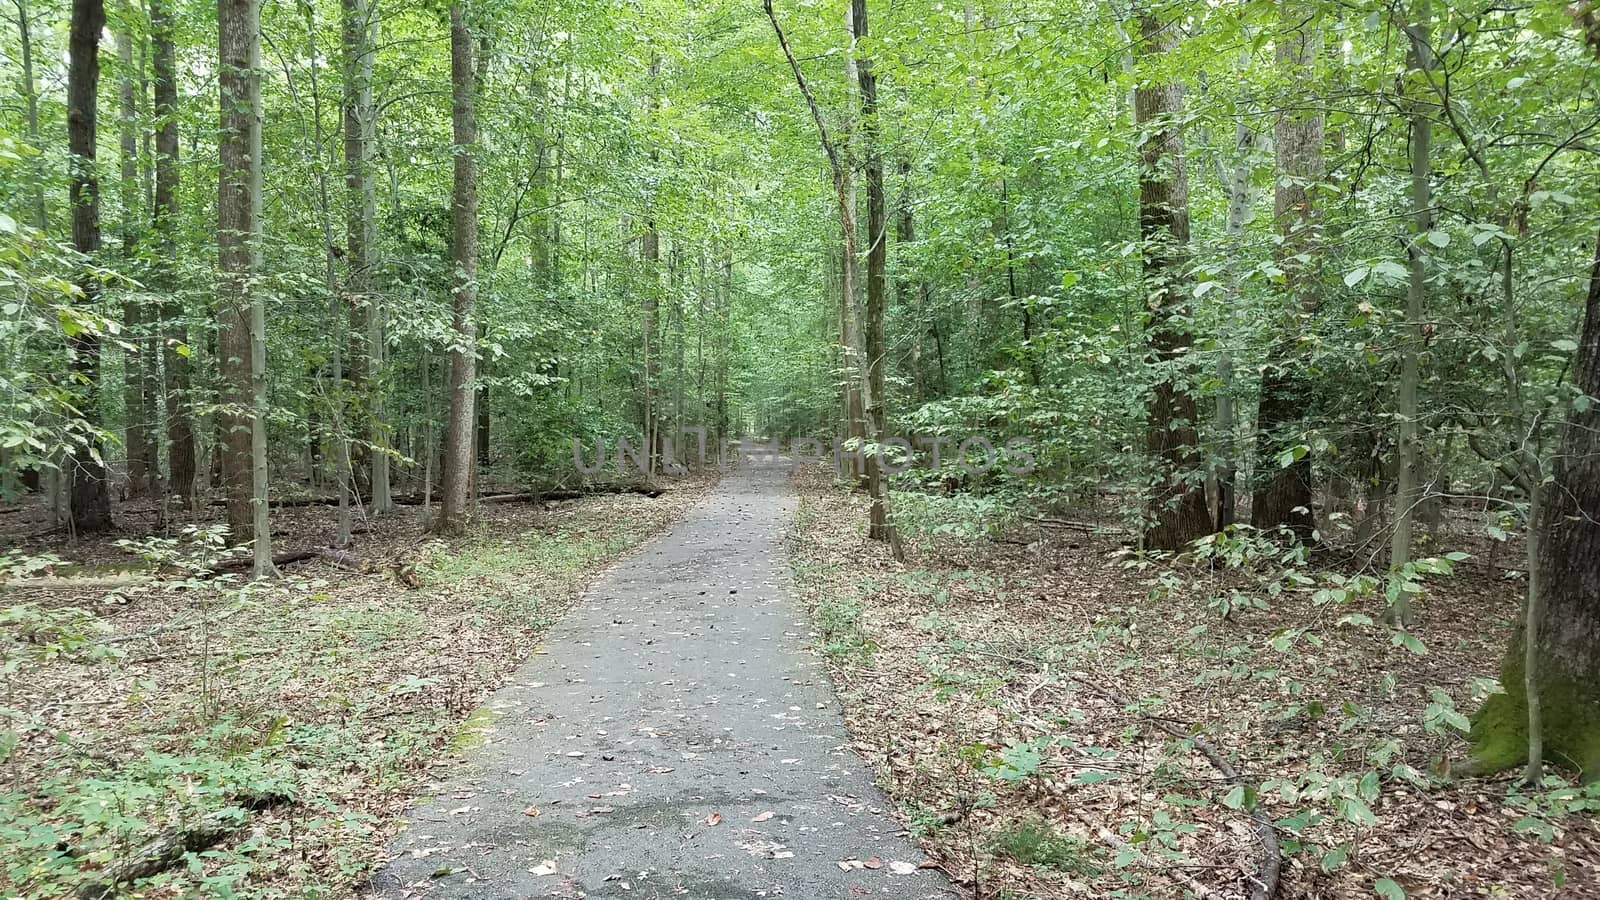 asphalt path or trail in woods or forest with trees